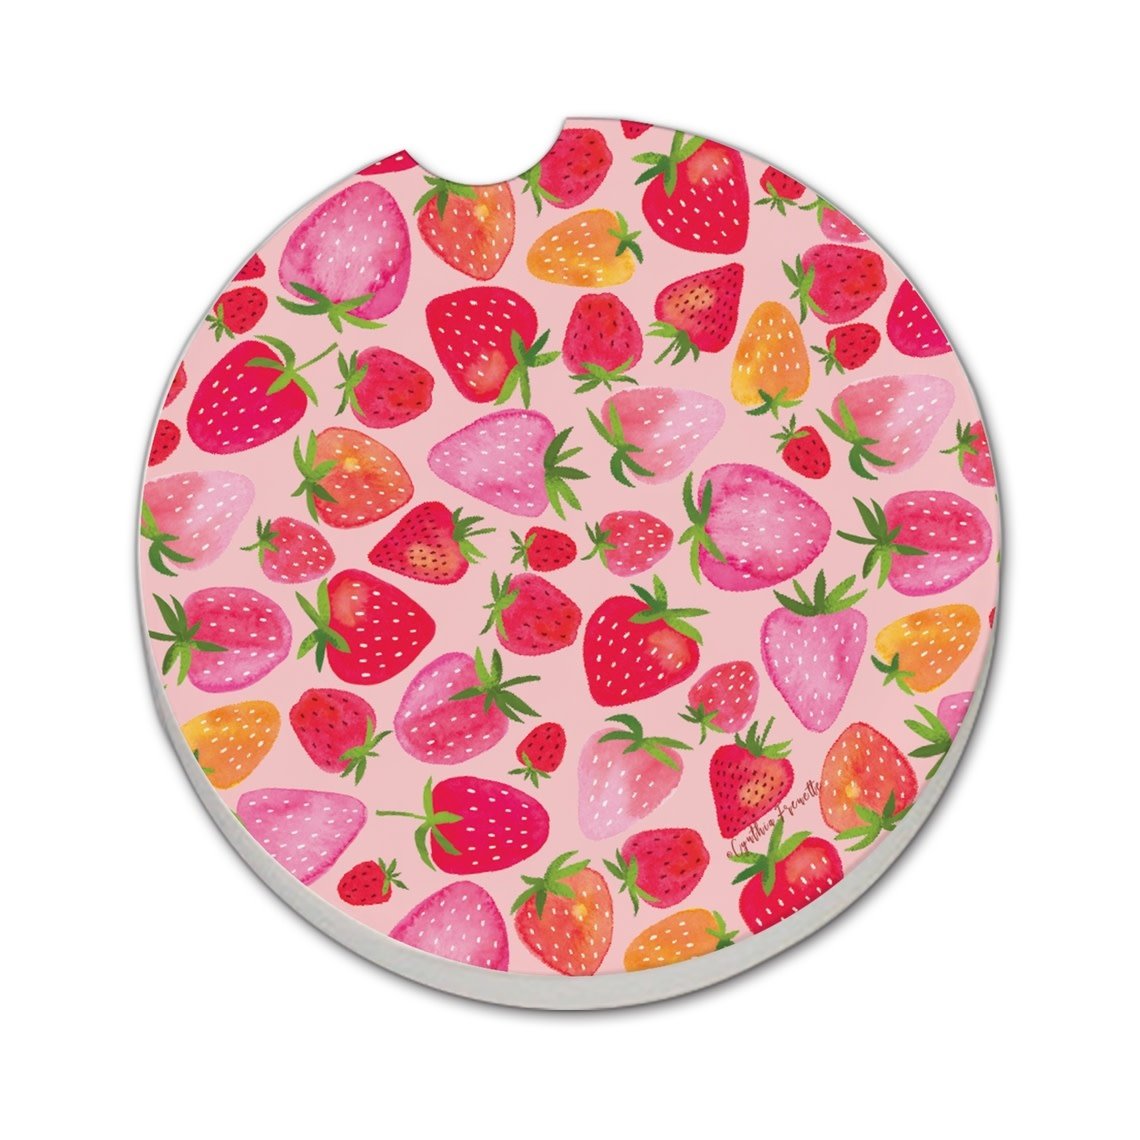 CounterArt and Highland Home "Berry Sweet" Stone Car Coaster